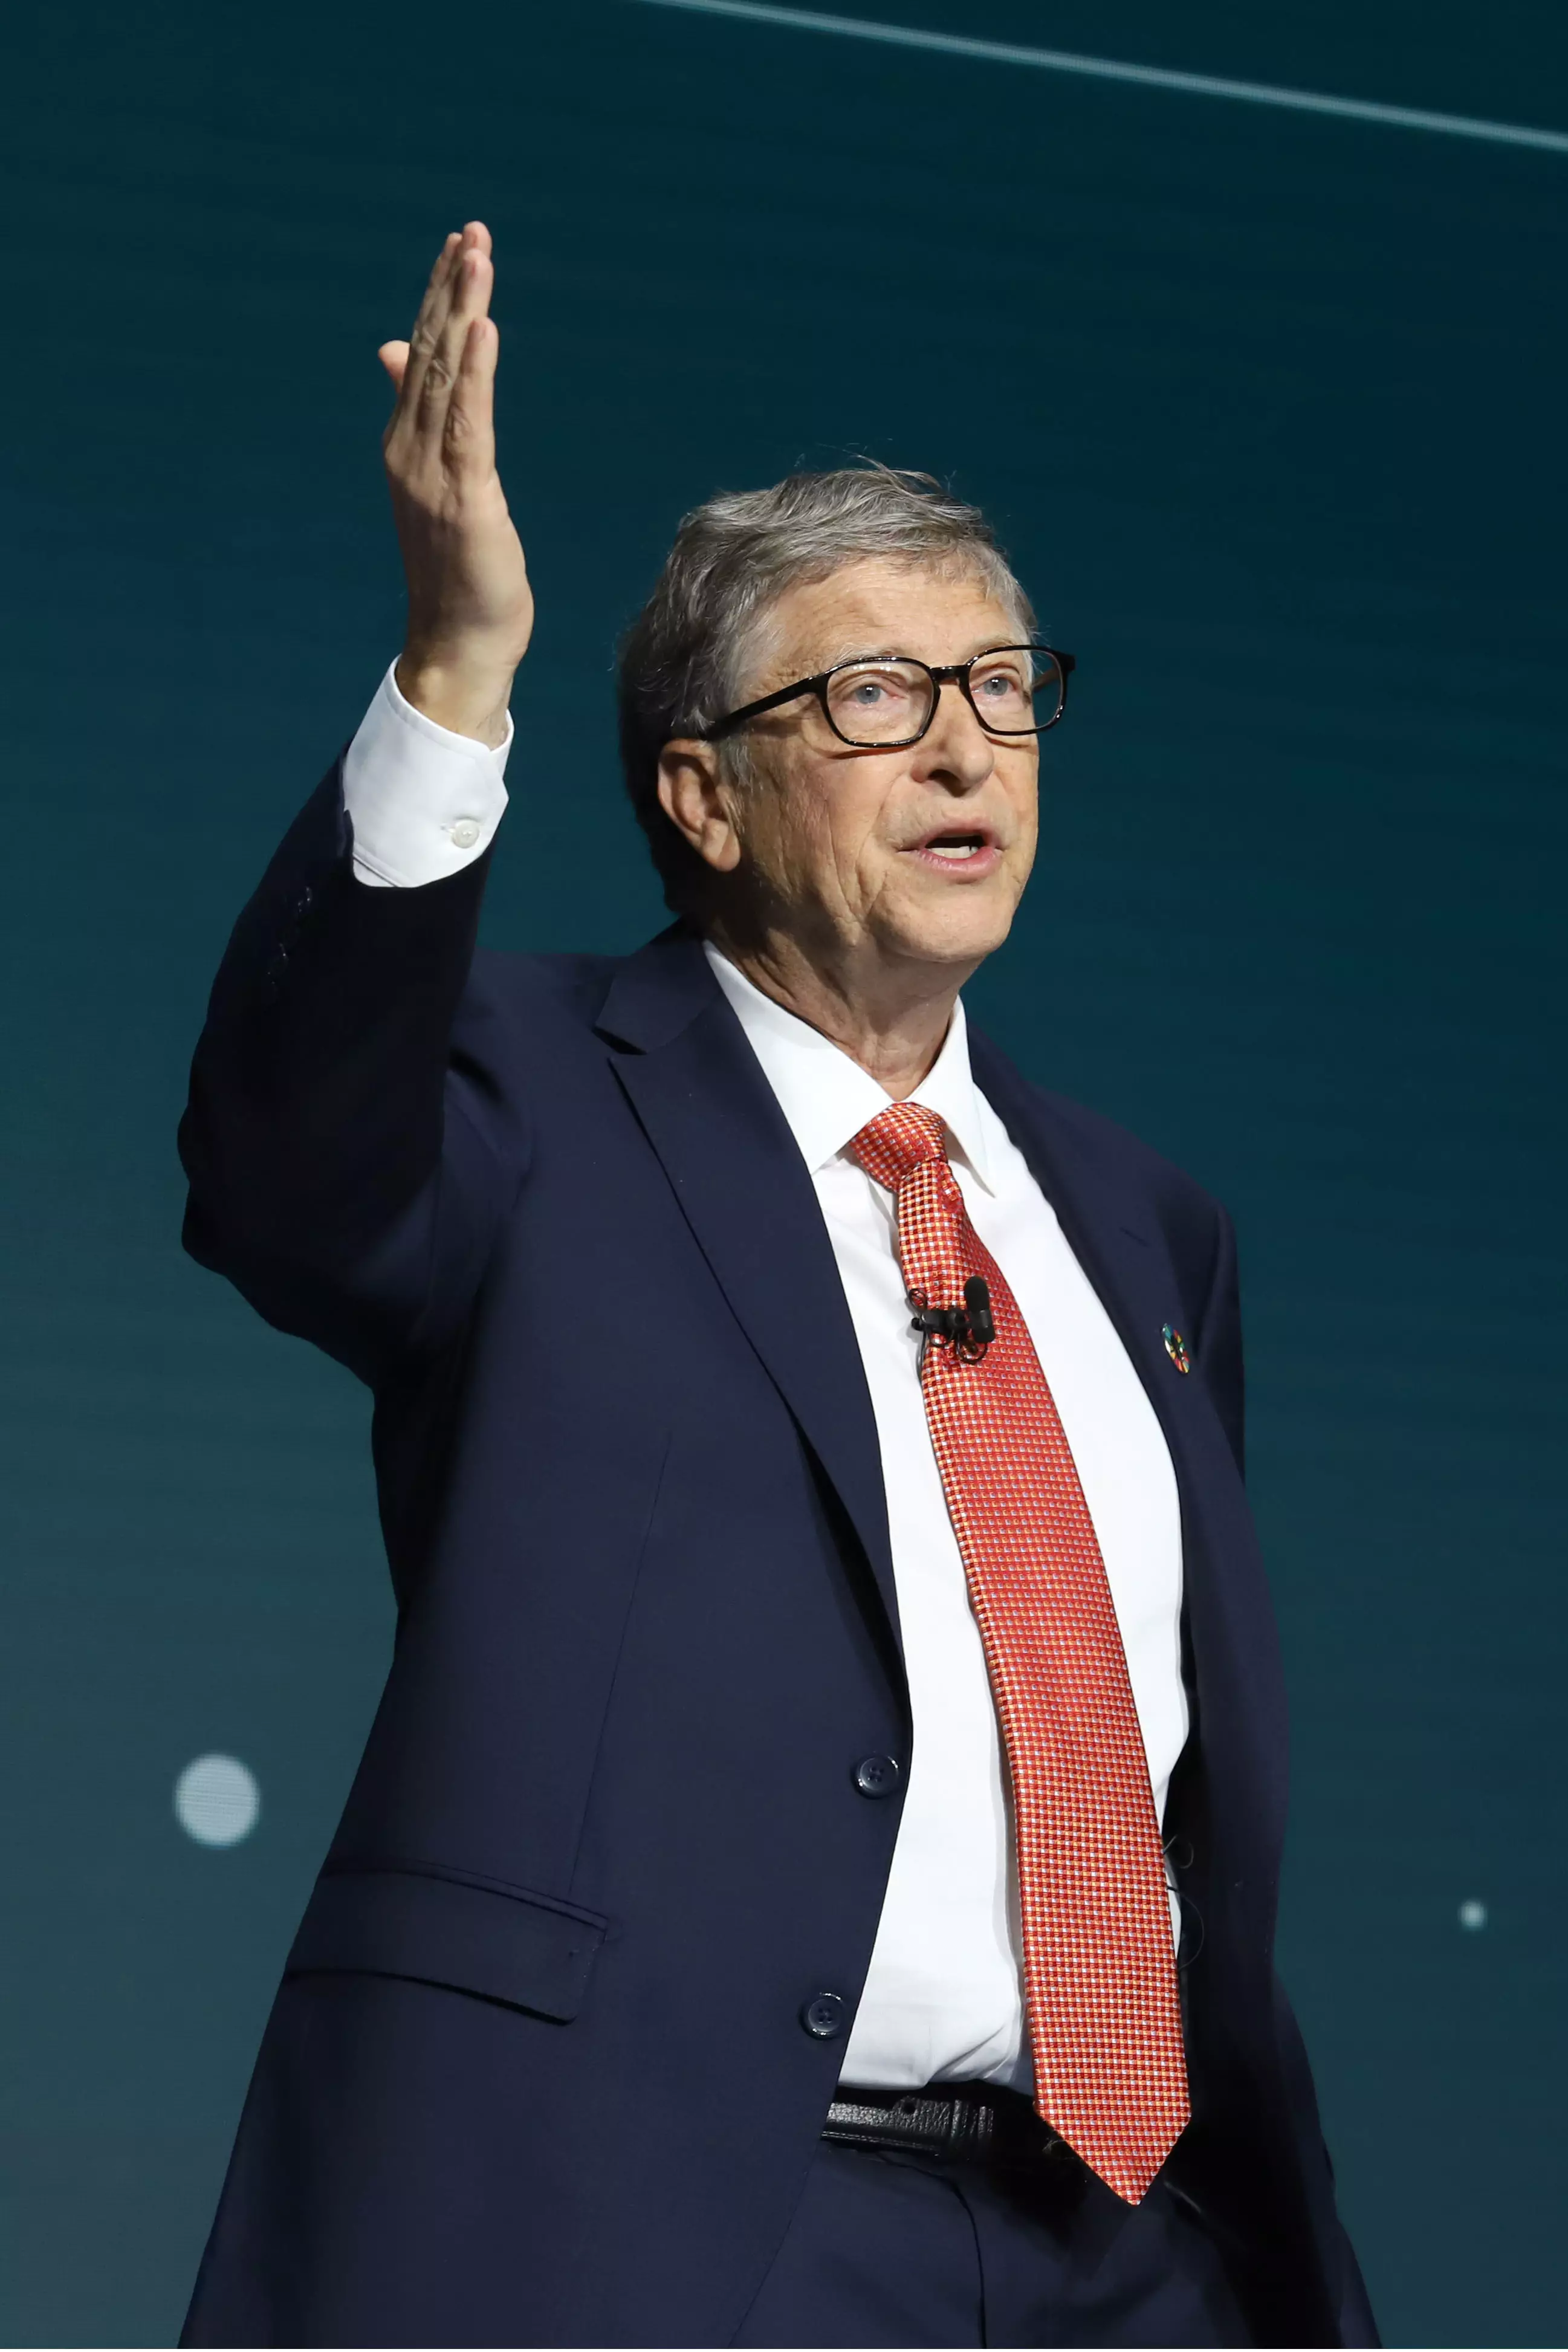 Bill Gates says he hopes the 'evil' conspiracy theories will go away.